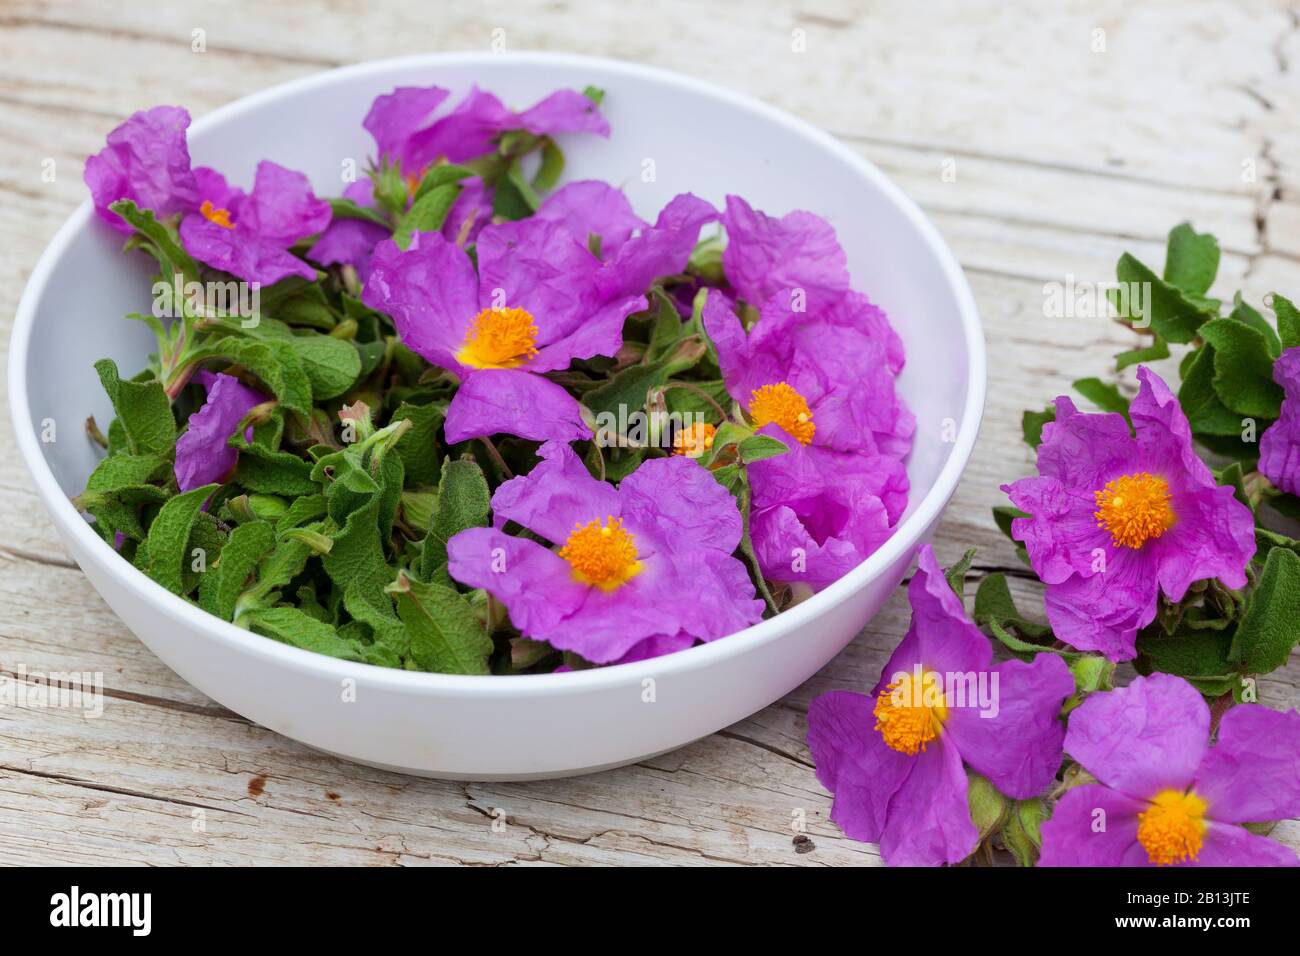 Pink Rock-Rose, Hoary Rock-Rose, hairy rockrose, rock rose, rock-rose, Grey-haired Rockrose, Cretan rockrose (Cistus creticus, Cistus incanus, Cistus villosus), collected flowers Stock Photo